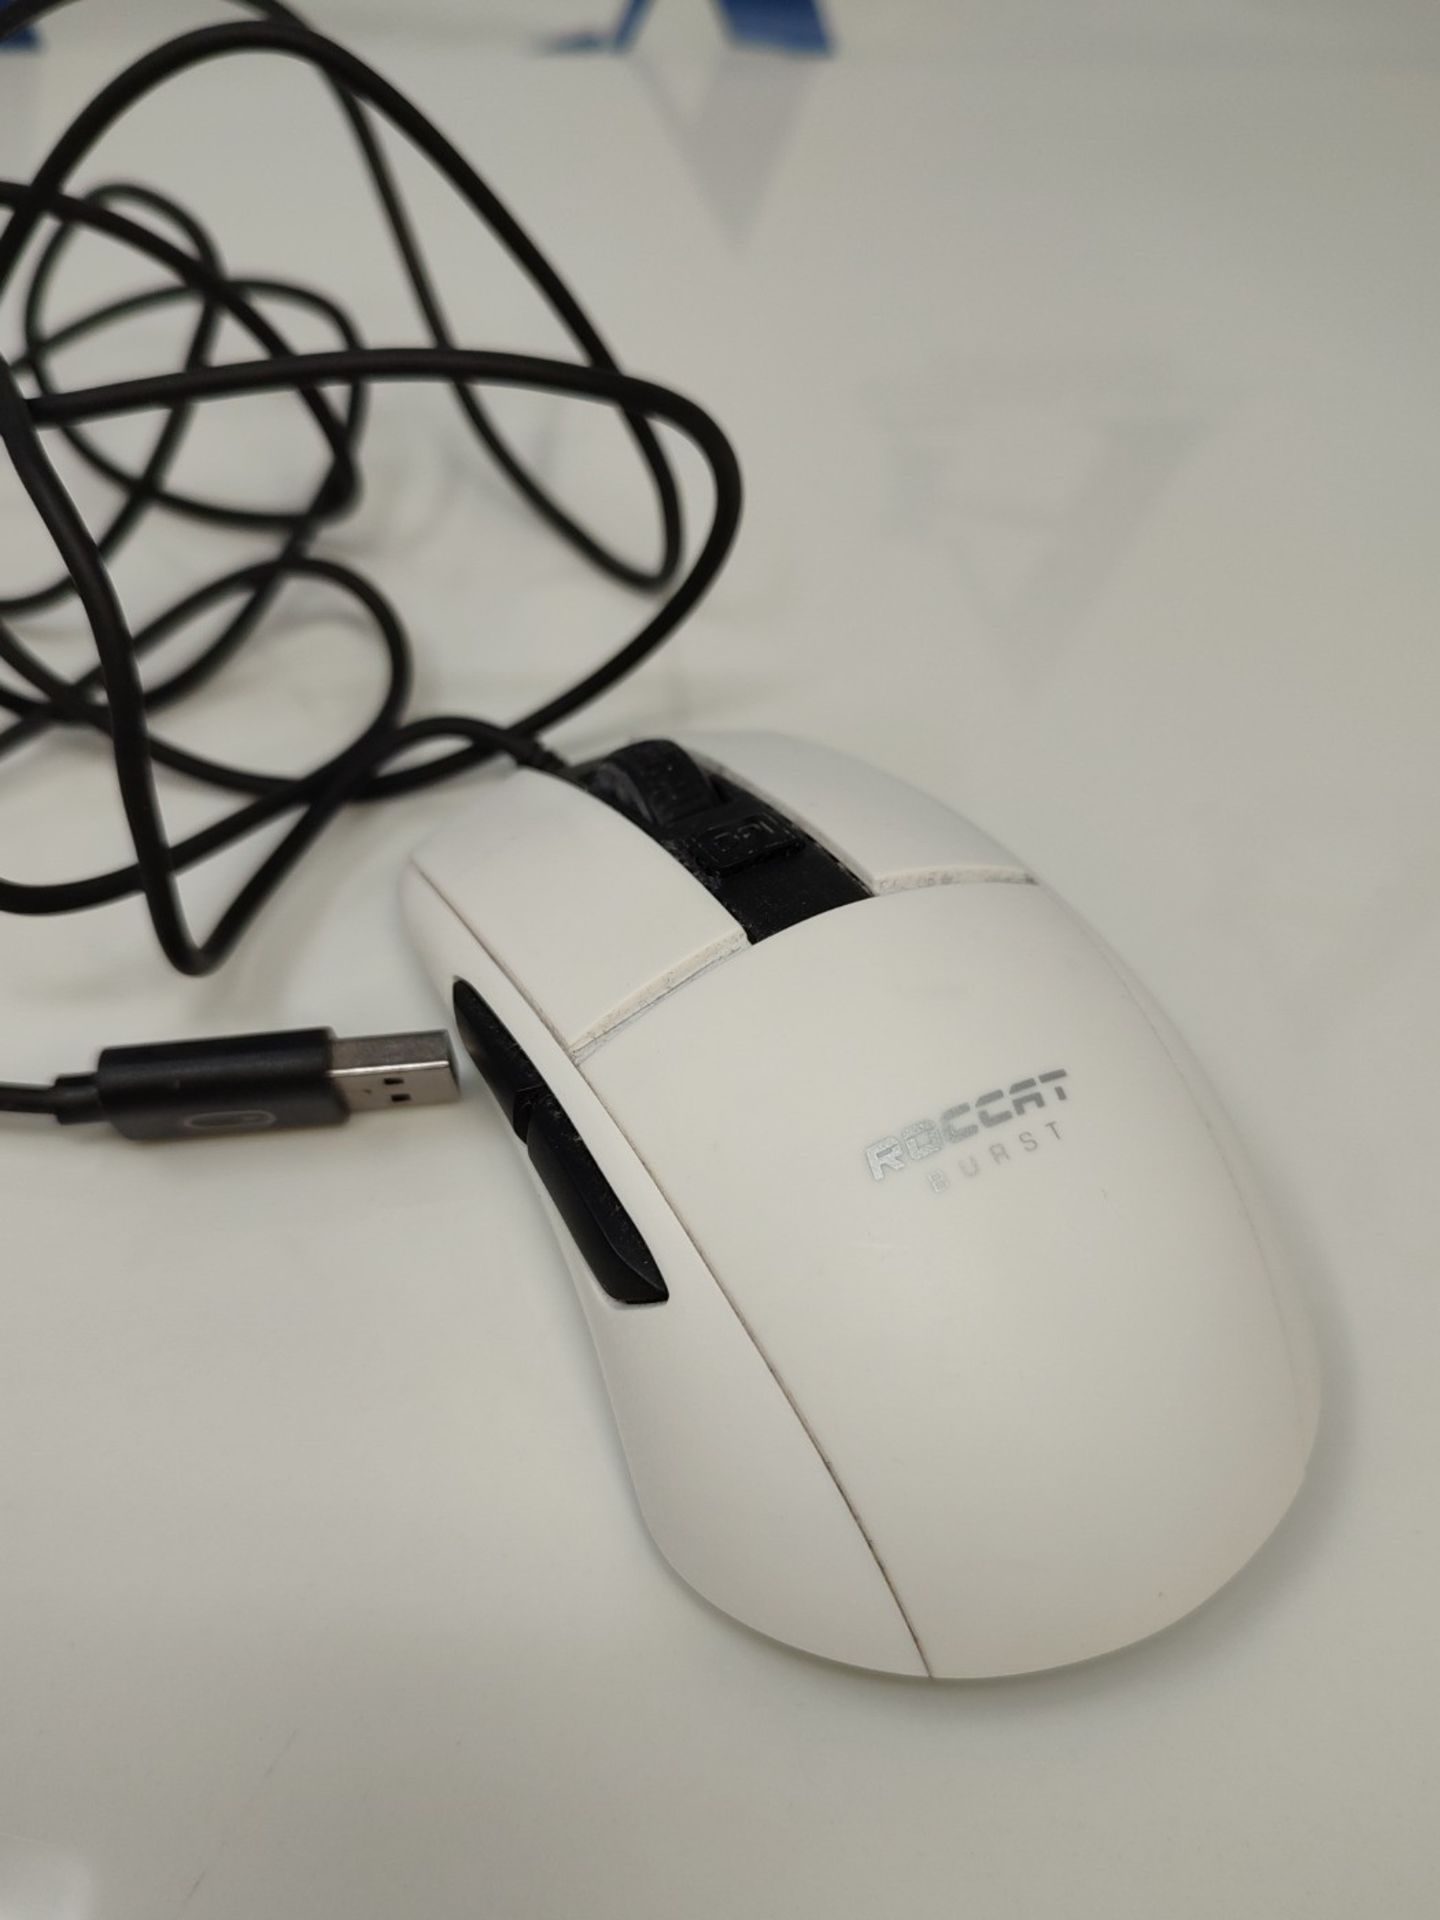 Roccat Burst - Extremely lightweight Optical Core Gaming Mouse (high precision, optica - Image 5 of 6